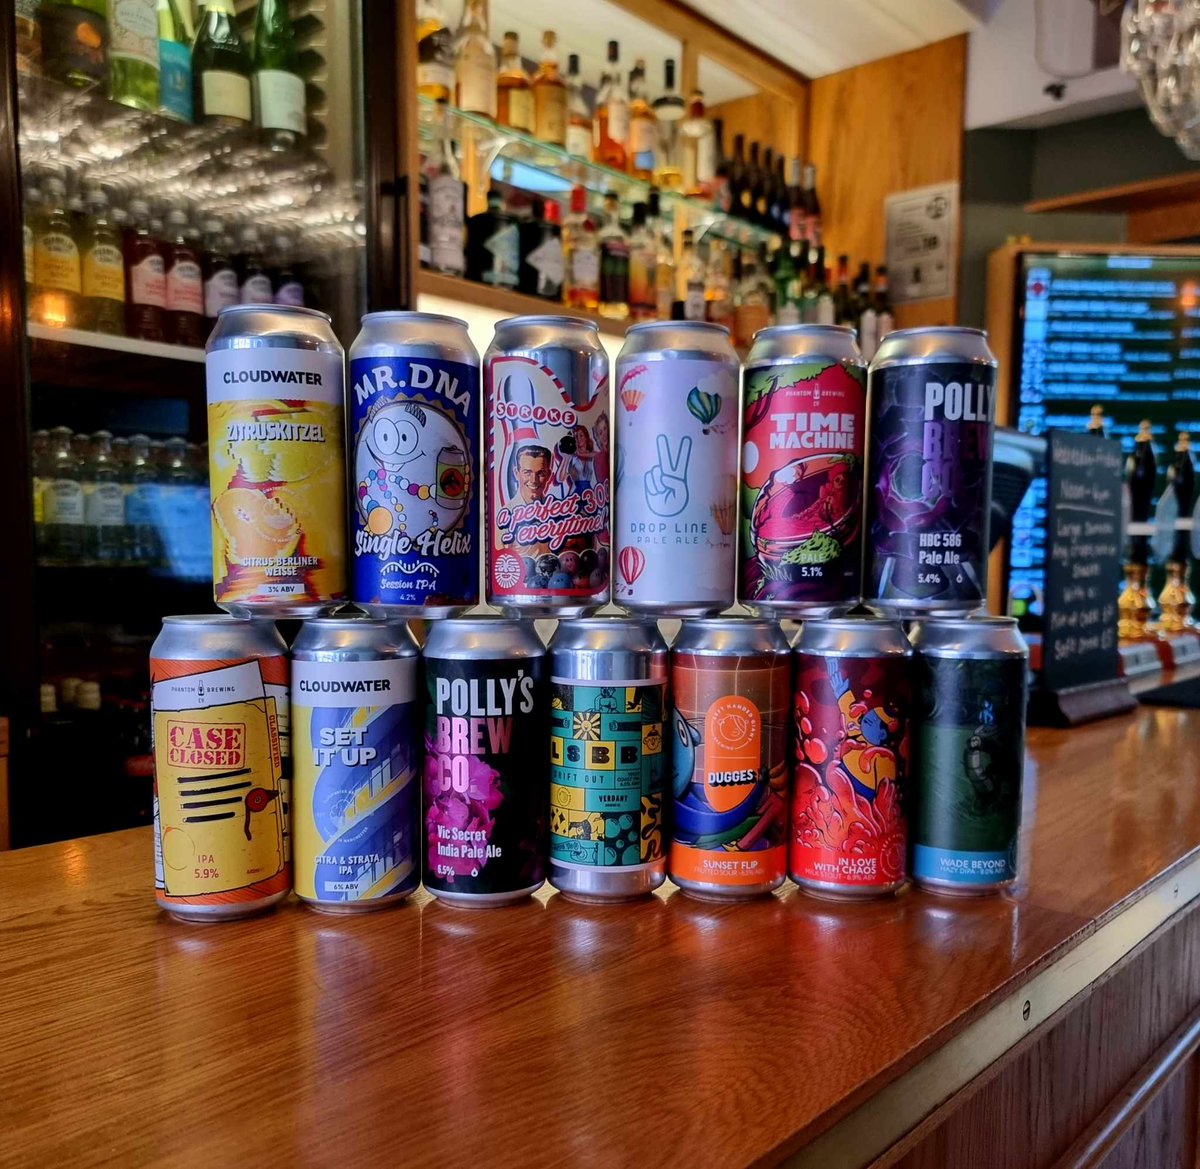 Fresh cans on site, to drink in or take away. Always a joy to see the esteemed likes of Cloudwater and LHG alongside some classic hazy drops from Pollys and Phantom. All those and some delightful looking tipples from Sureshot and Weekend Project.